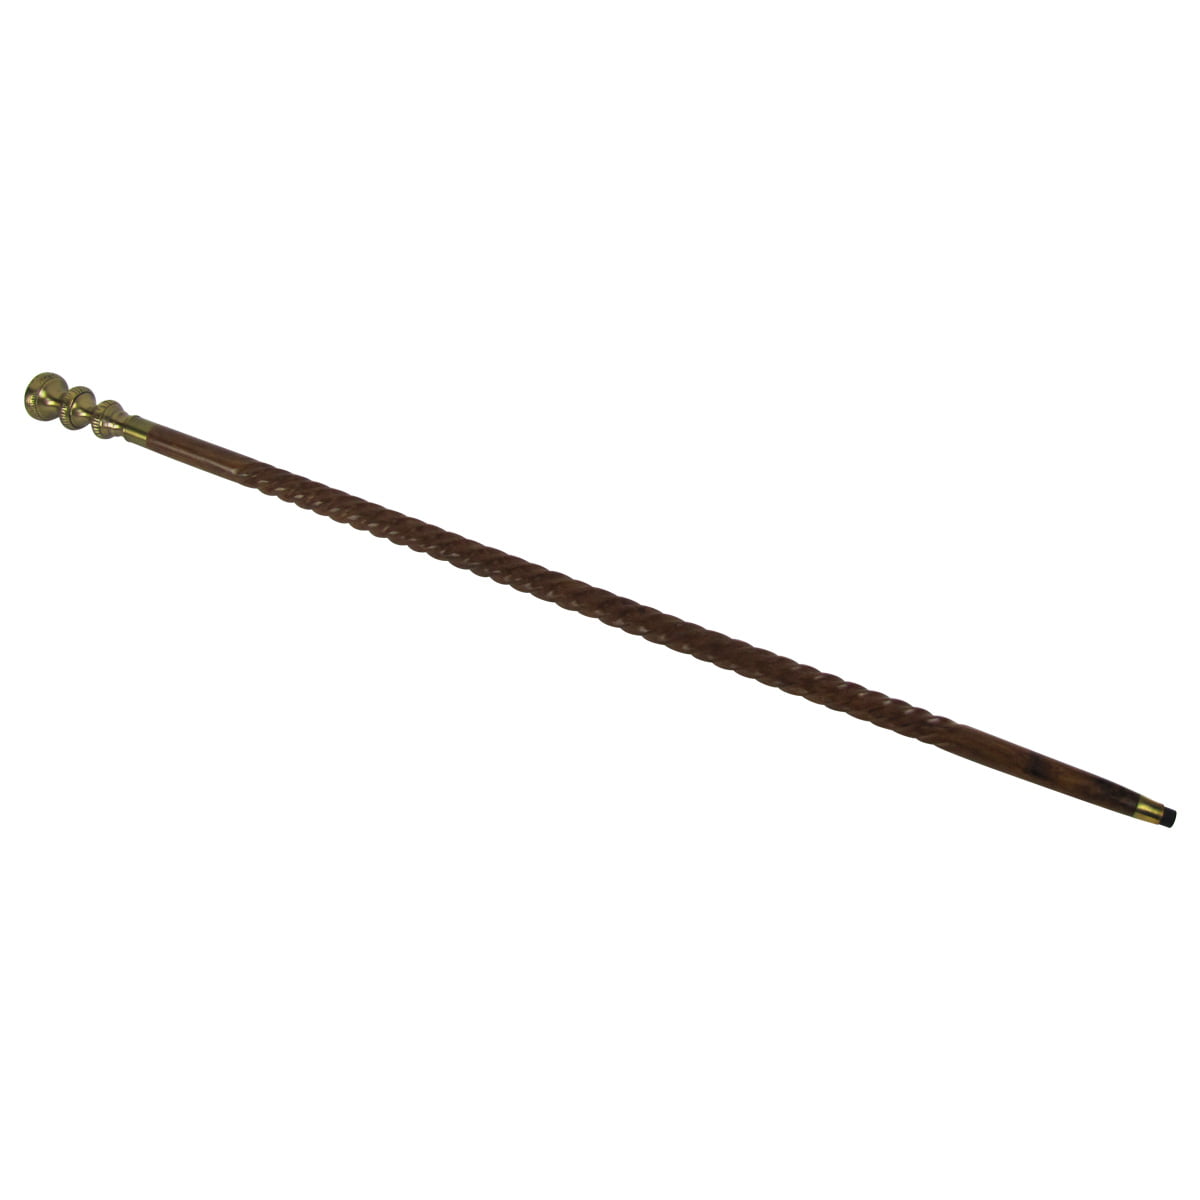 Brass Handle Vintage Style Wooden Shaft Walking Cane Stick Victorian Style Gift 